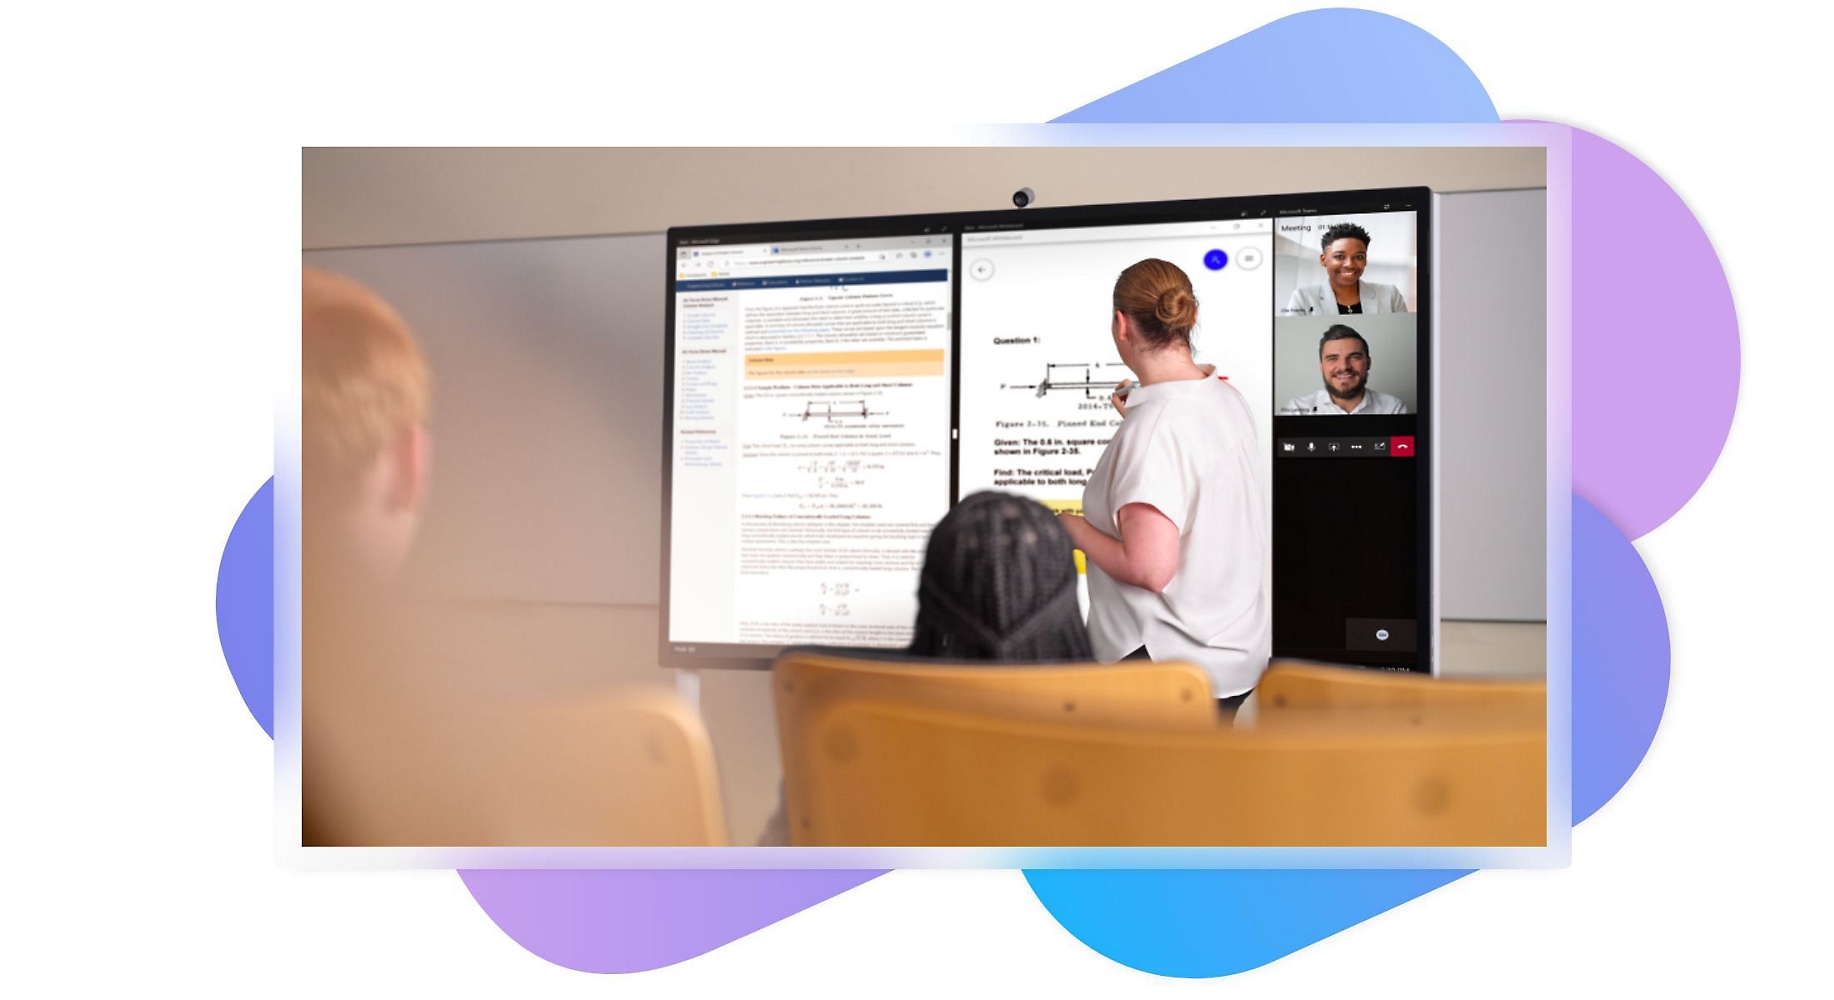 A person presenting work to a class that is being displayed on a large screen behind them that is also connected to a Teams call.